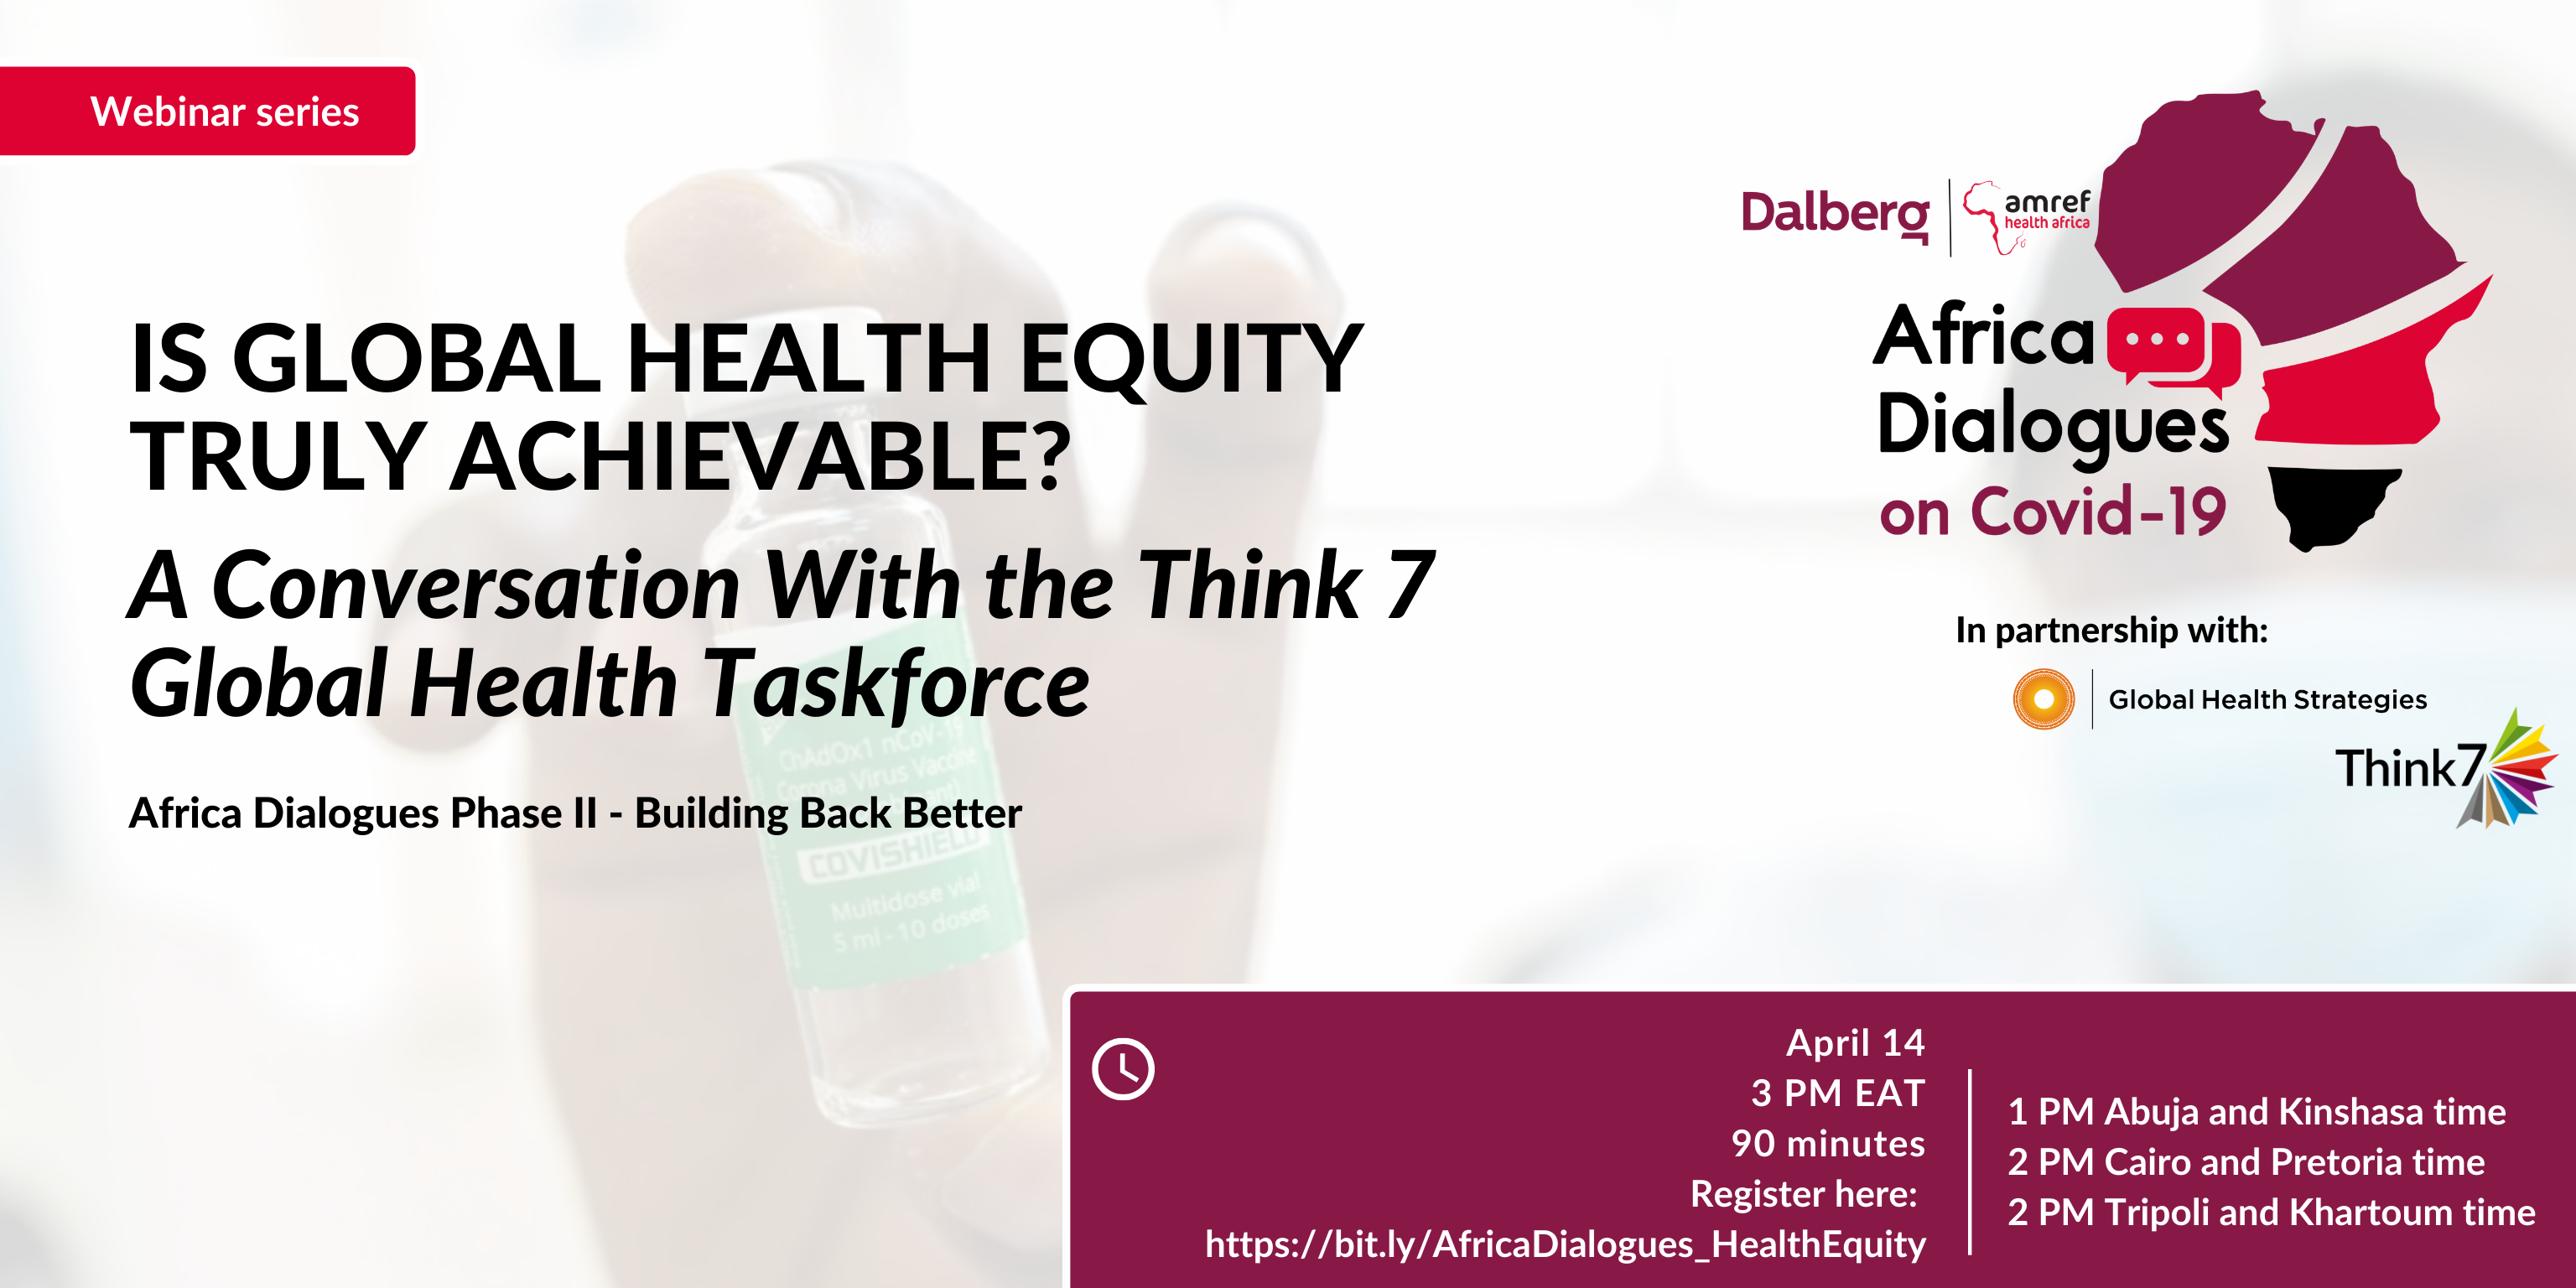 Is Global Health Equity Truly Achievable? A Conversation With the Think 7 Global Health Taskforce